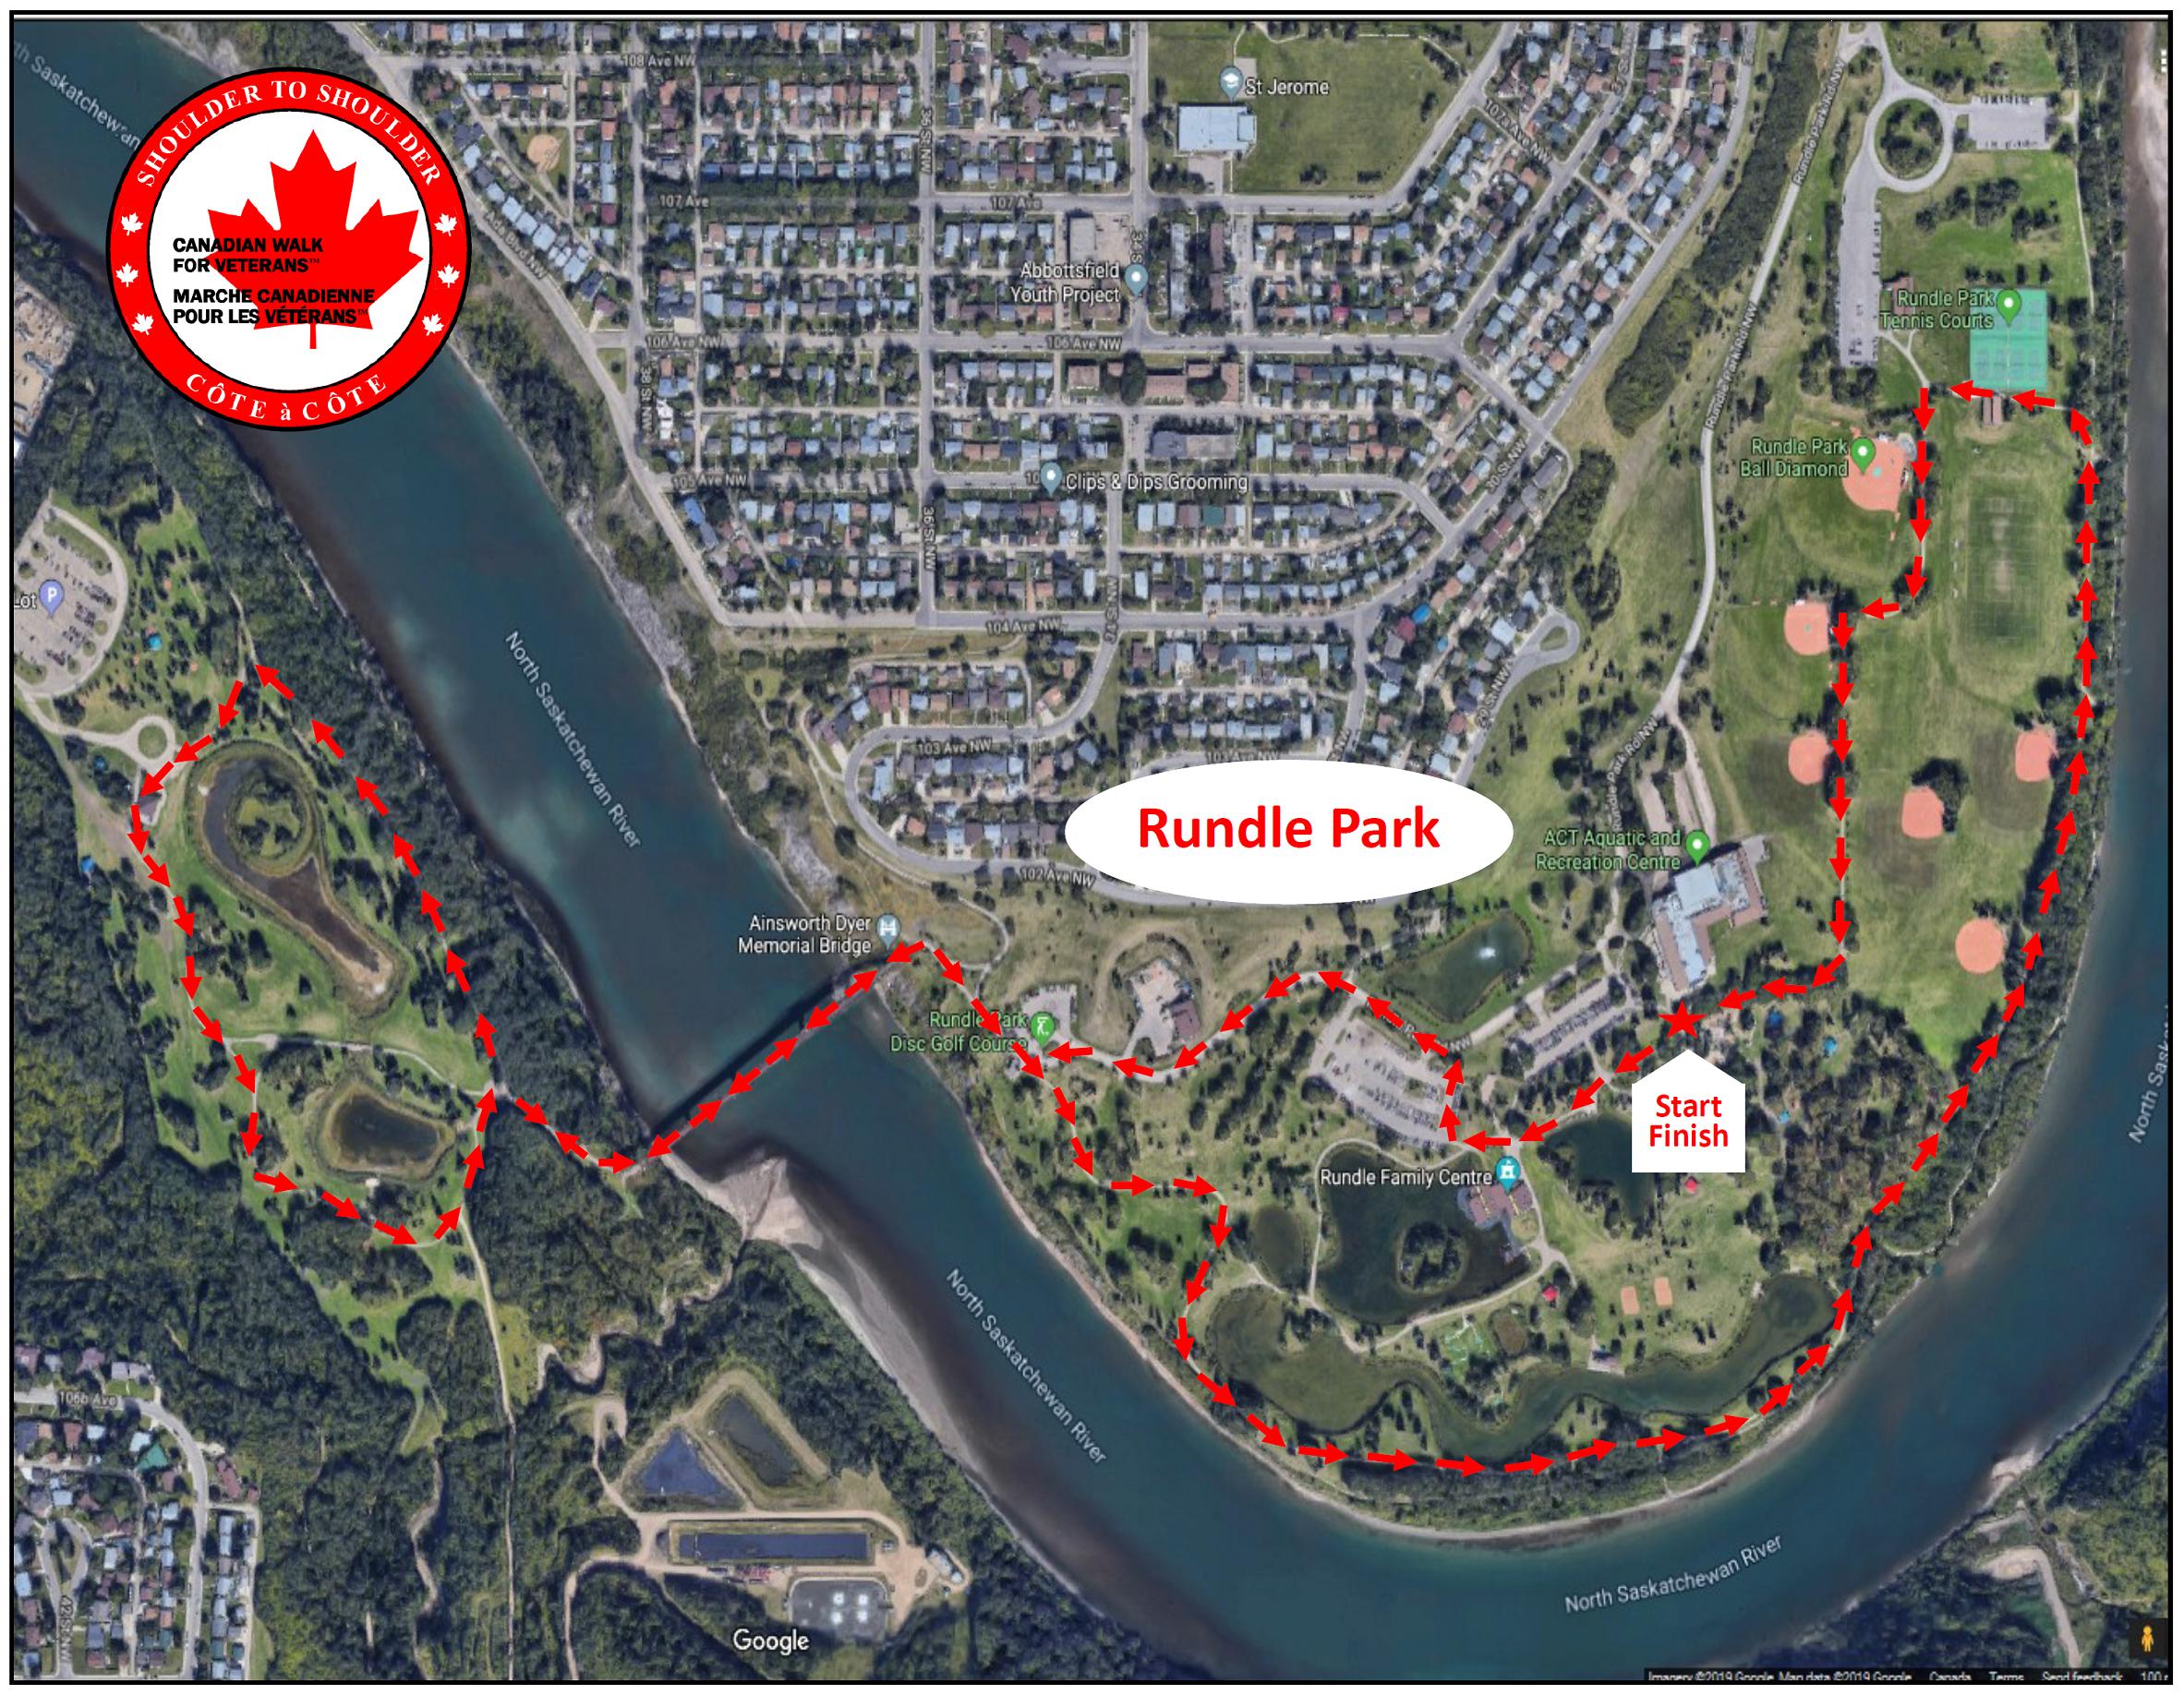 2022 White Rock Route Map